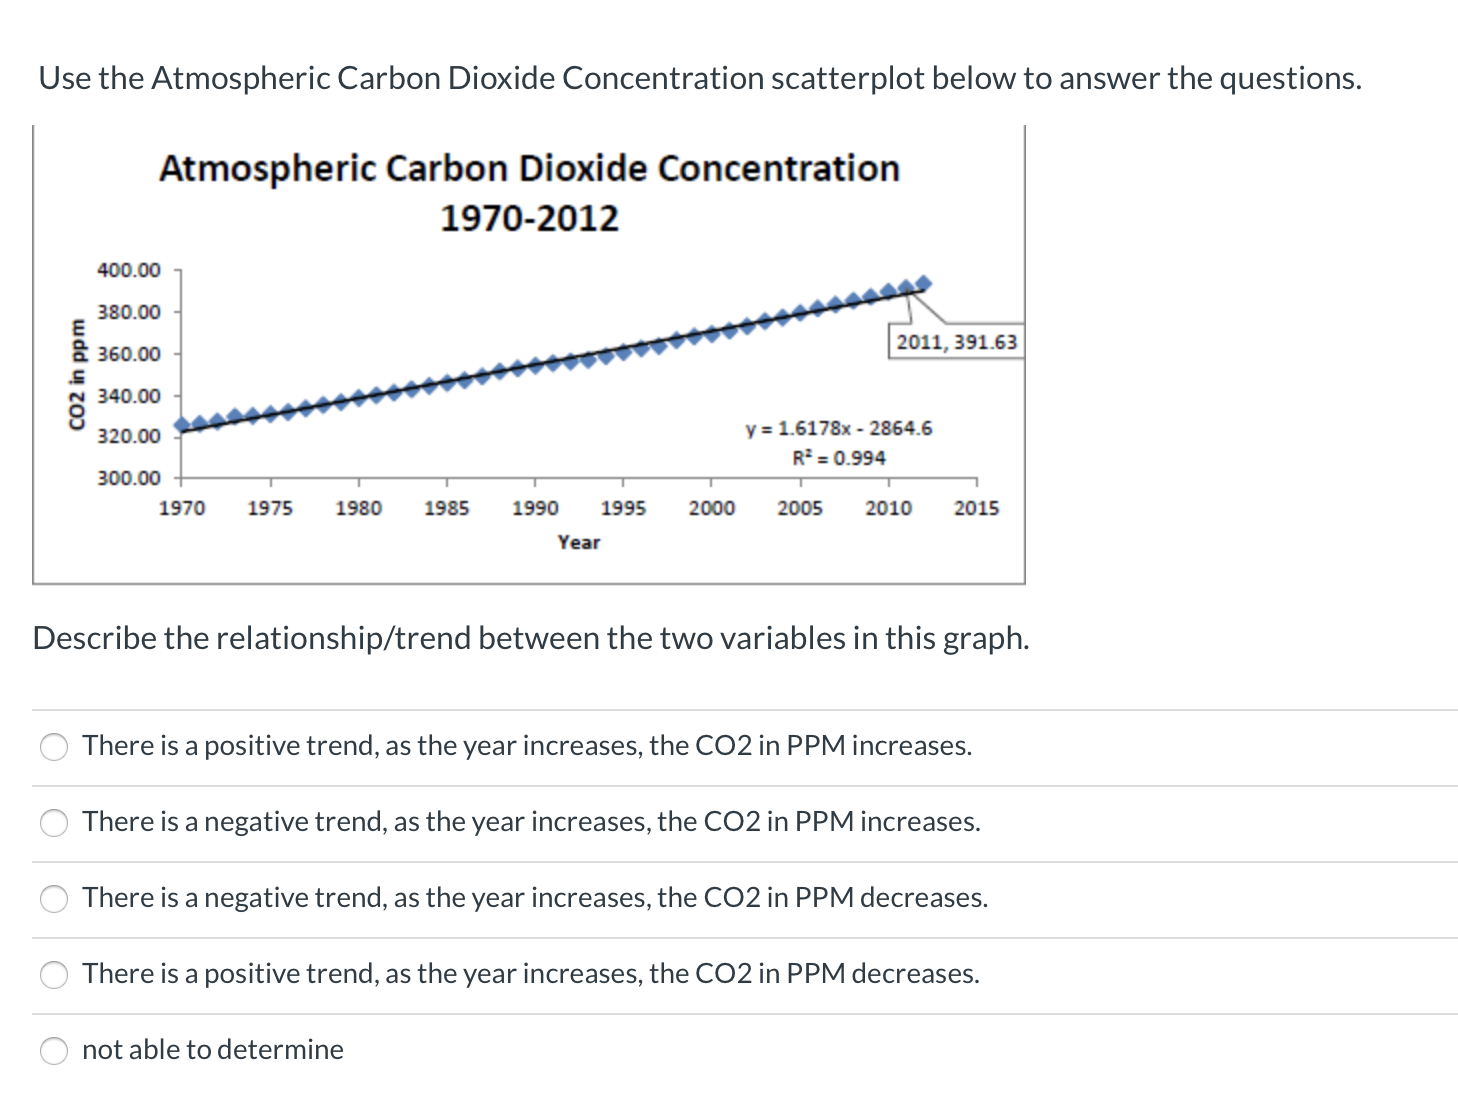 Use the Atmospheric Carbon Dioxide Concentration scatterplot below to answer the questions.
Atmospheric Carbon Dioxide Concentration
1970-2012
400.00
380.00
|2011, 391.63
360.00
340.00
y = 1.6178x - 2864.6
R² = 0.994
320.00
300.00
1970
1975
1980
1985
1990
1995
2000
2005
2010
2015
Year
CO2 in ppm
